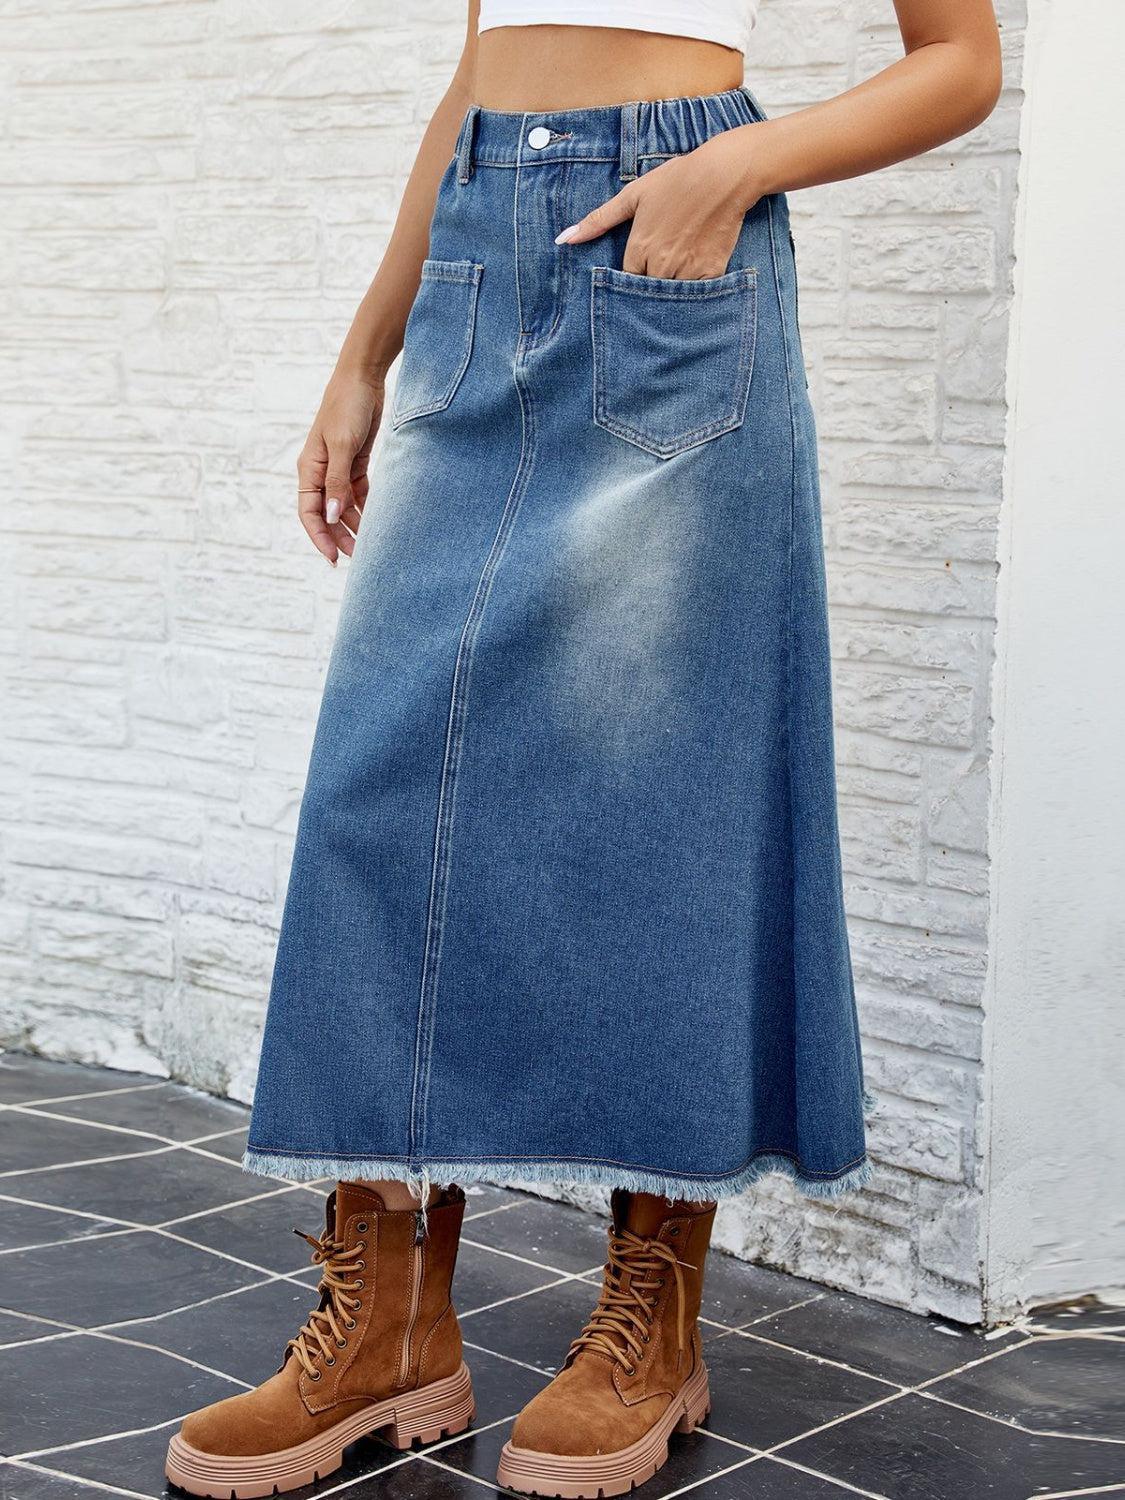 a woman in a white crop top and a denim skirt